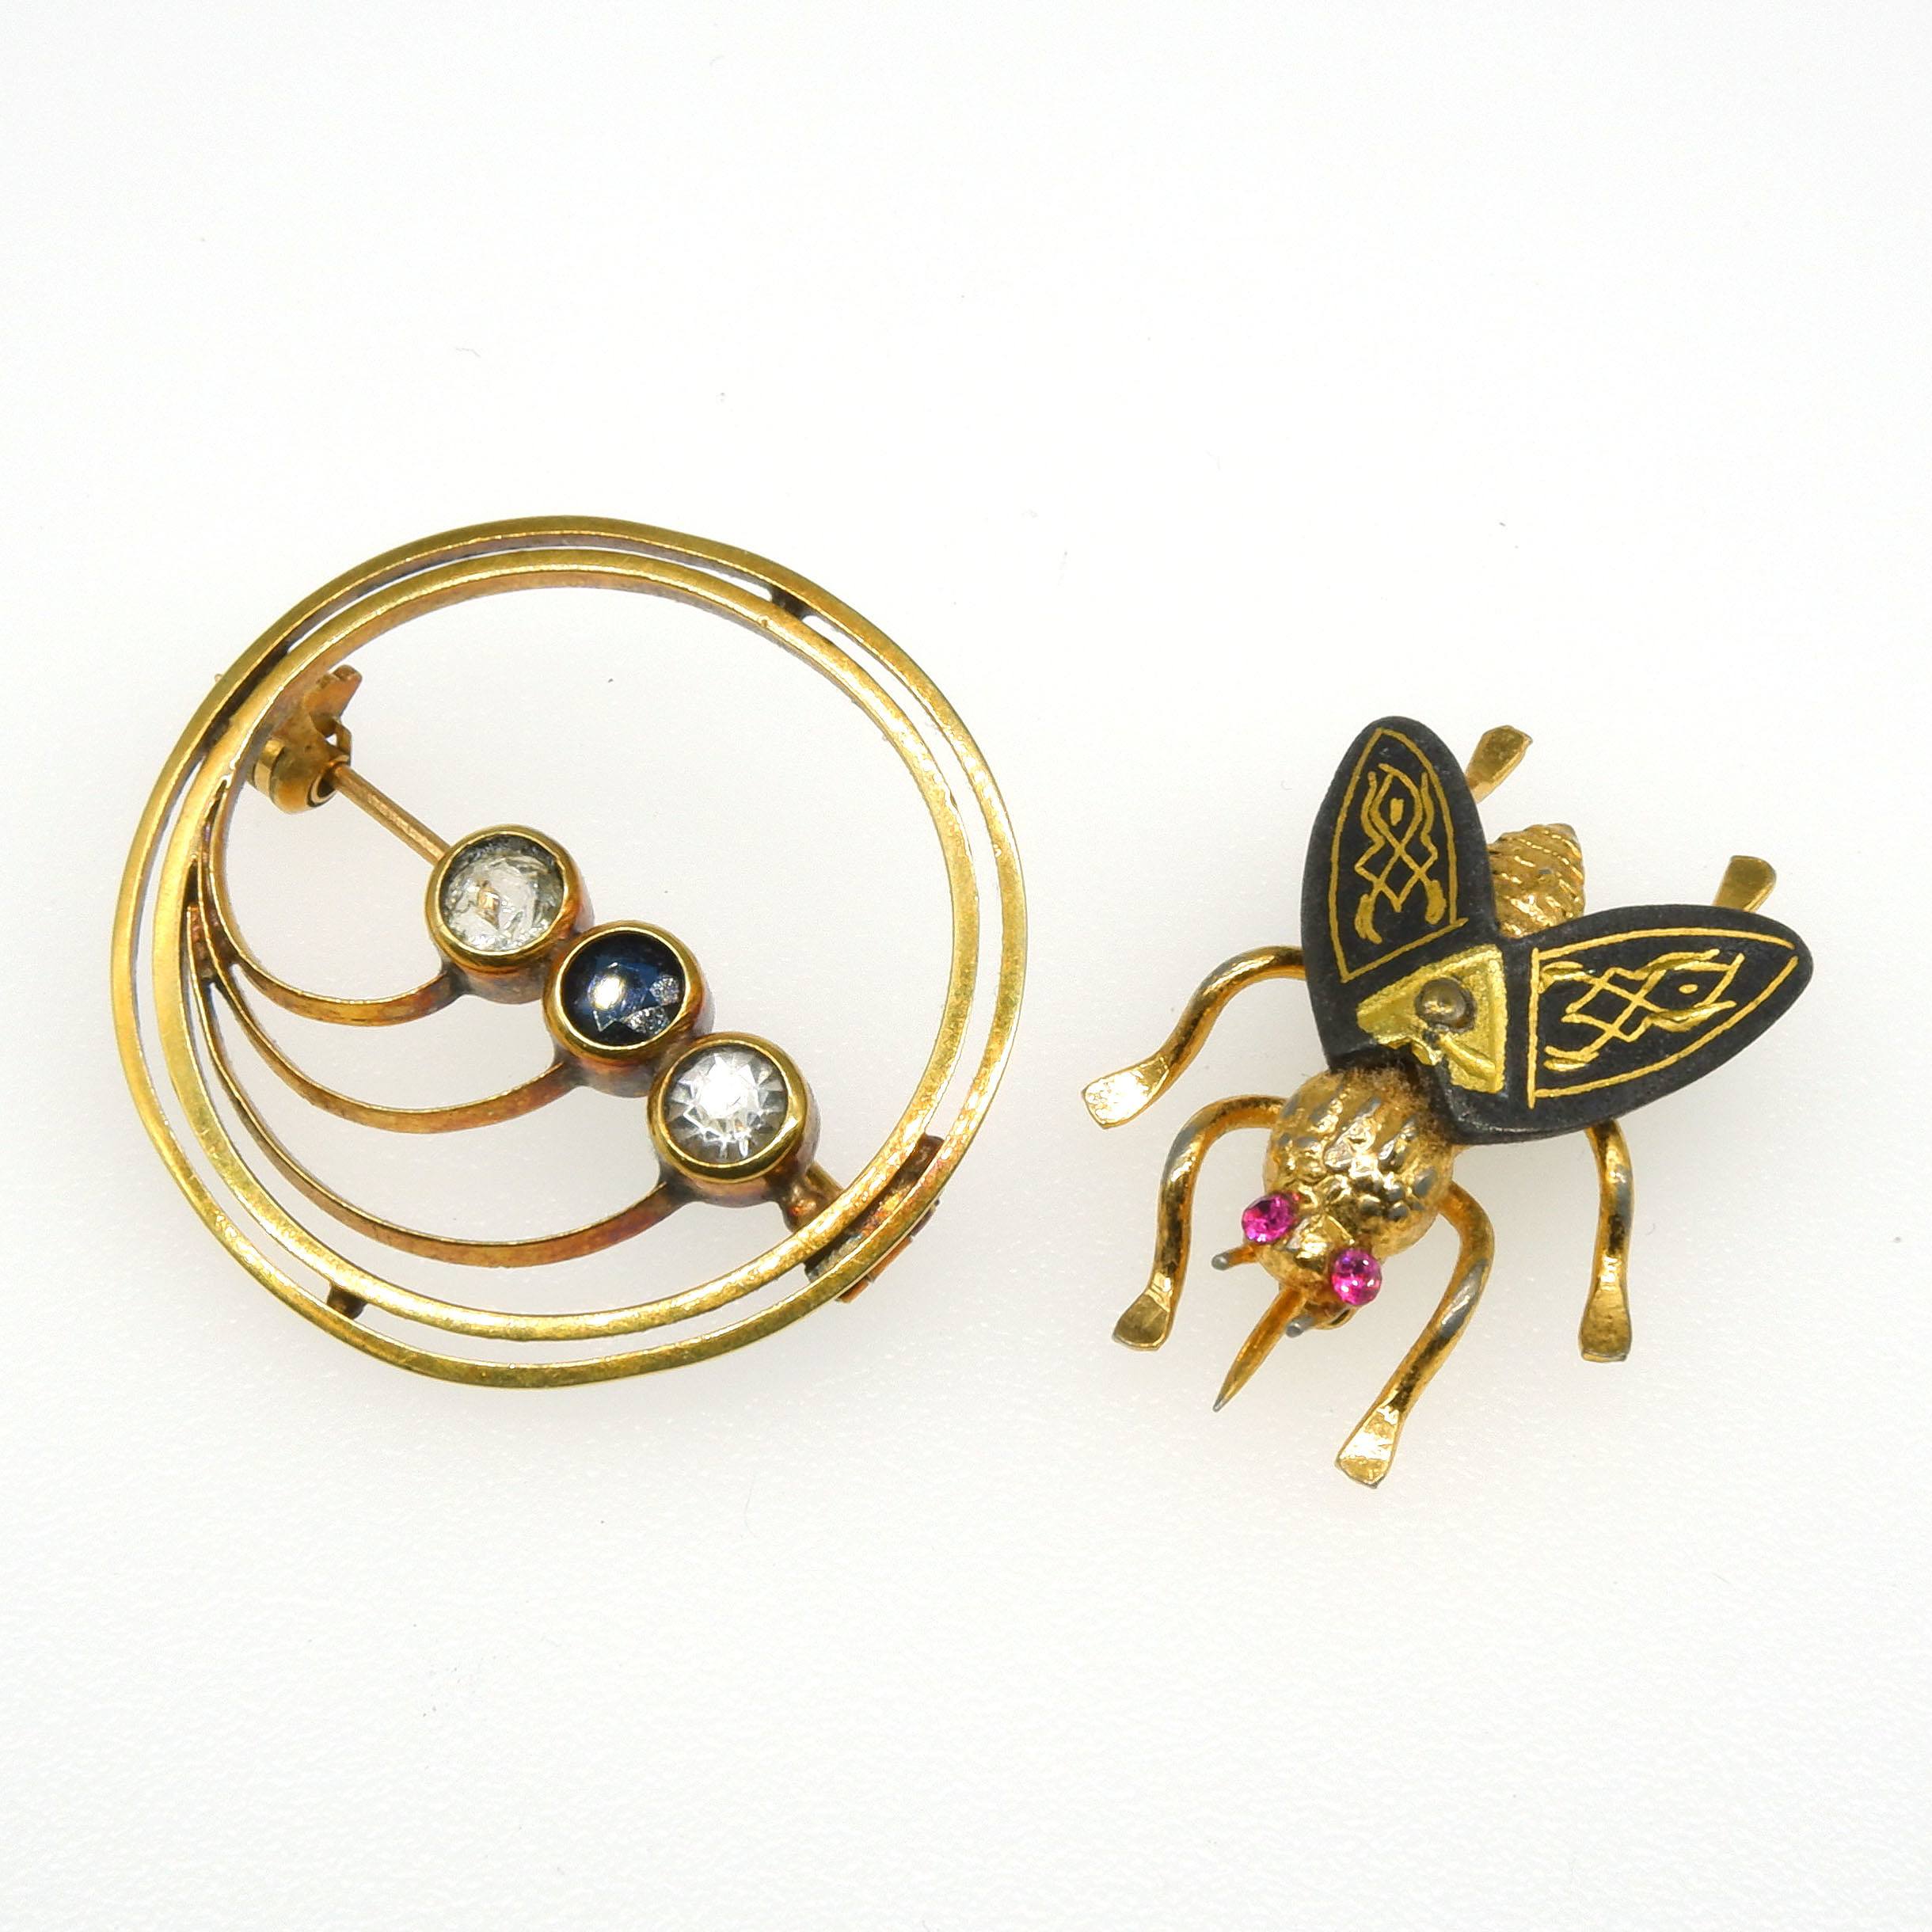 'Costume Jewellery Fly and Brooch'